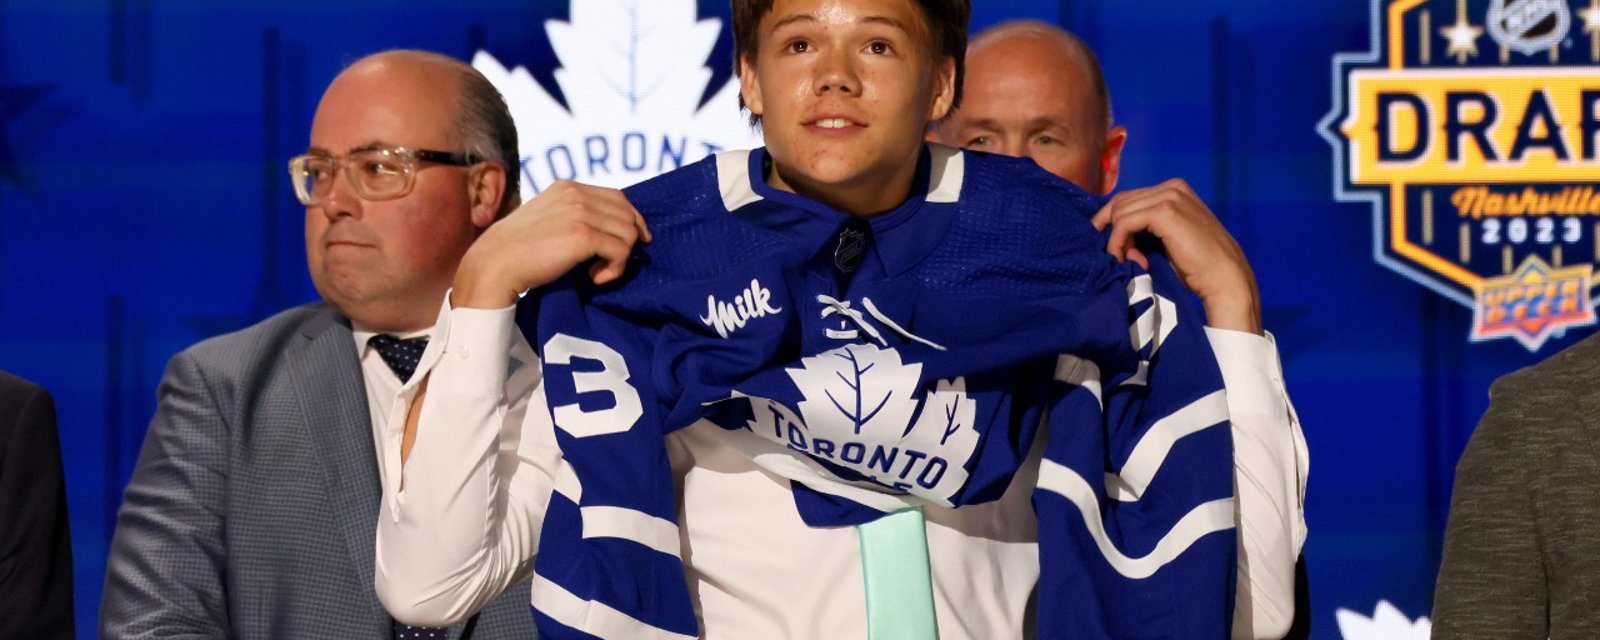 Maple Leafs prospect Easton Cowan claps back at haters 